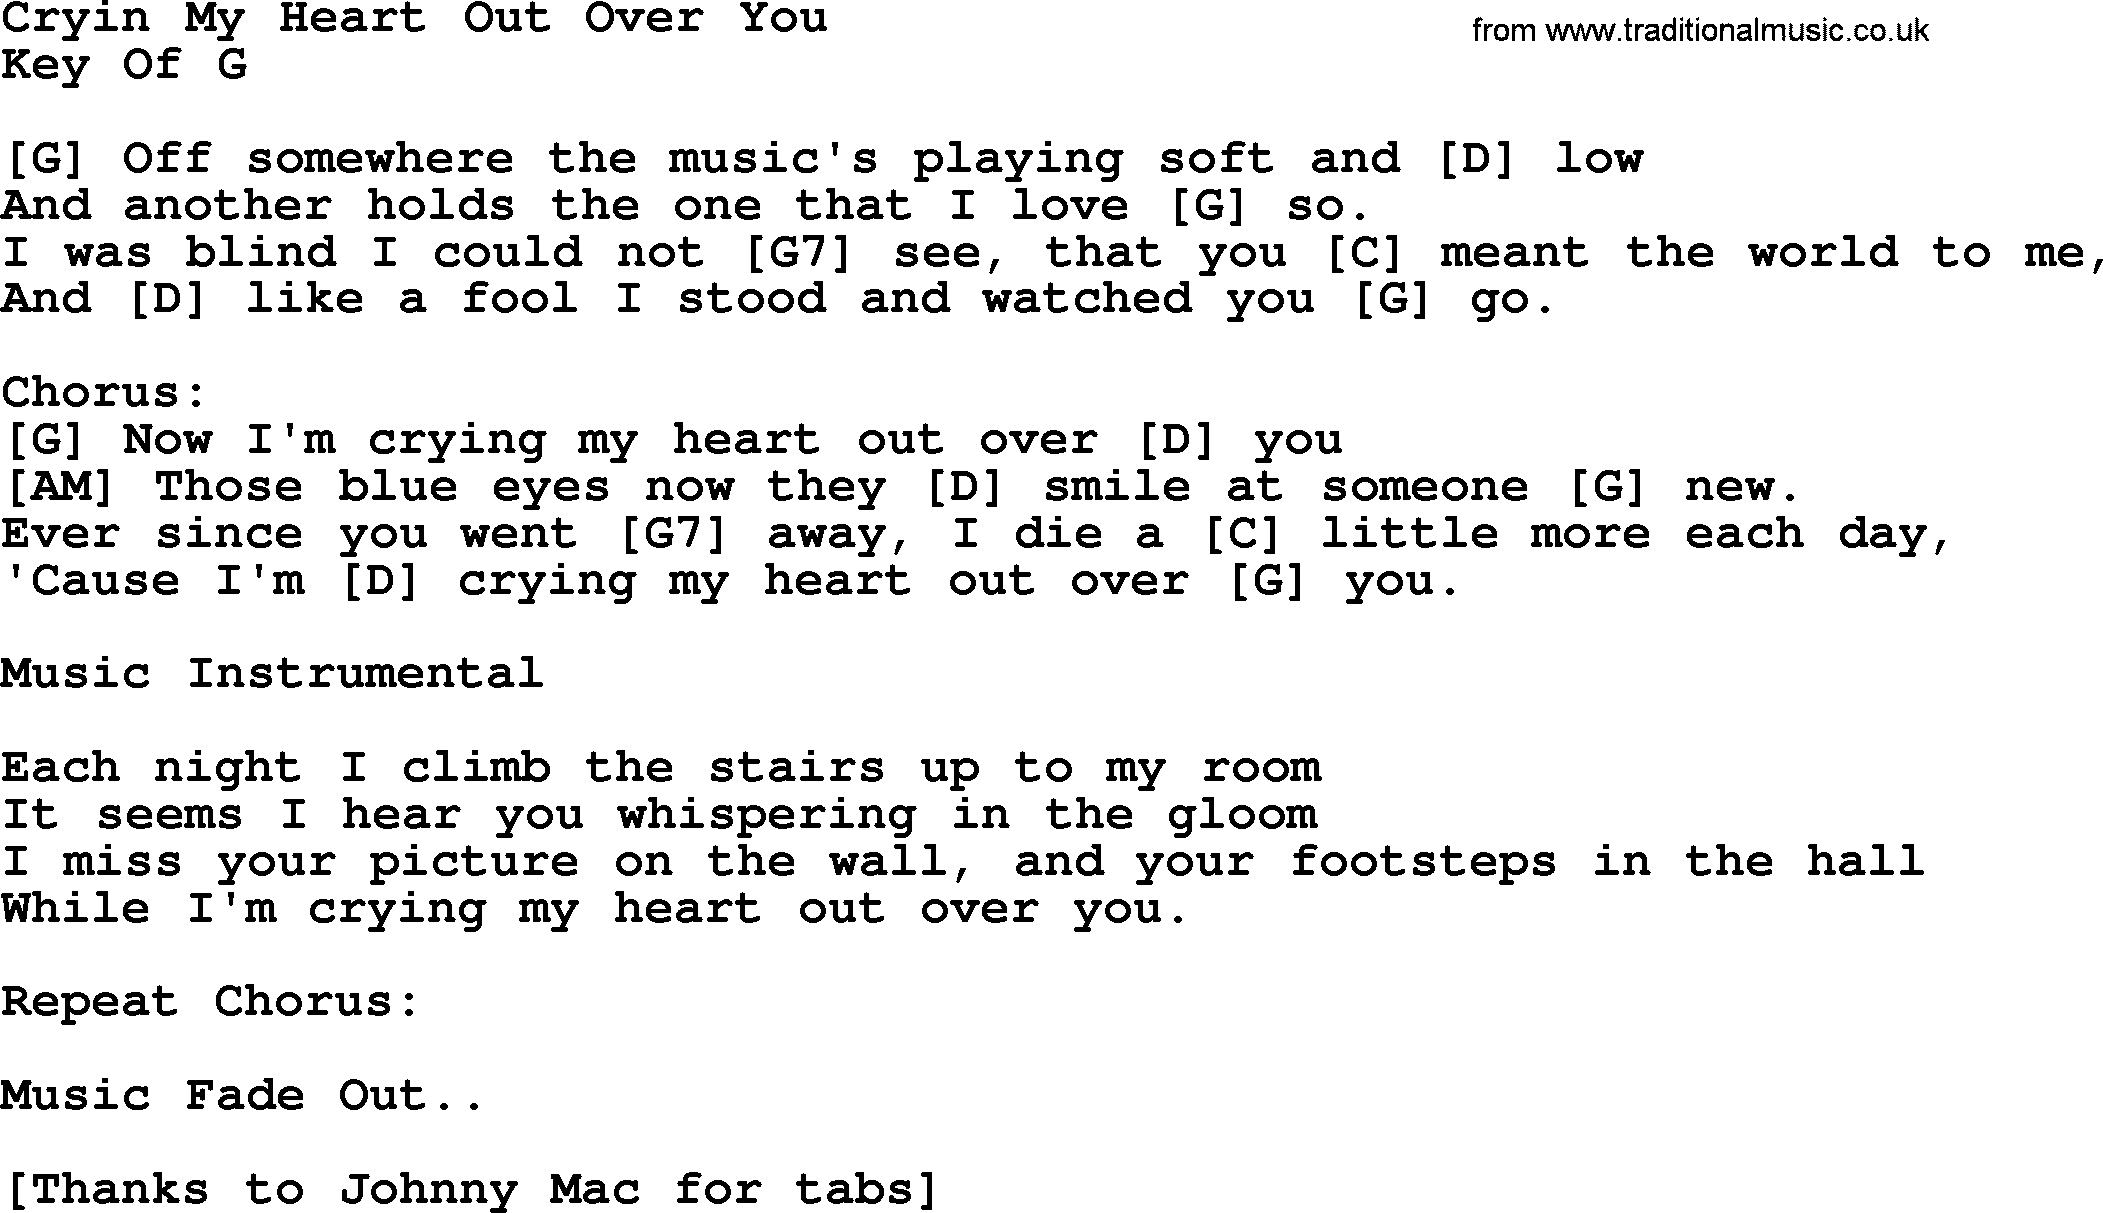 Bluegrass song: Cryin My Heart Out Over You, lyrics and chords